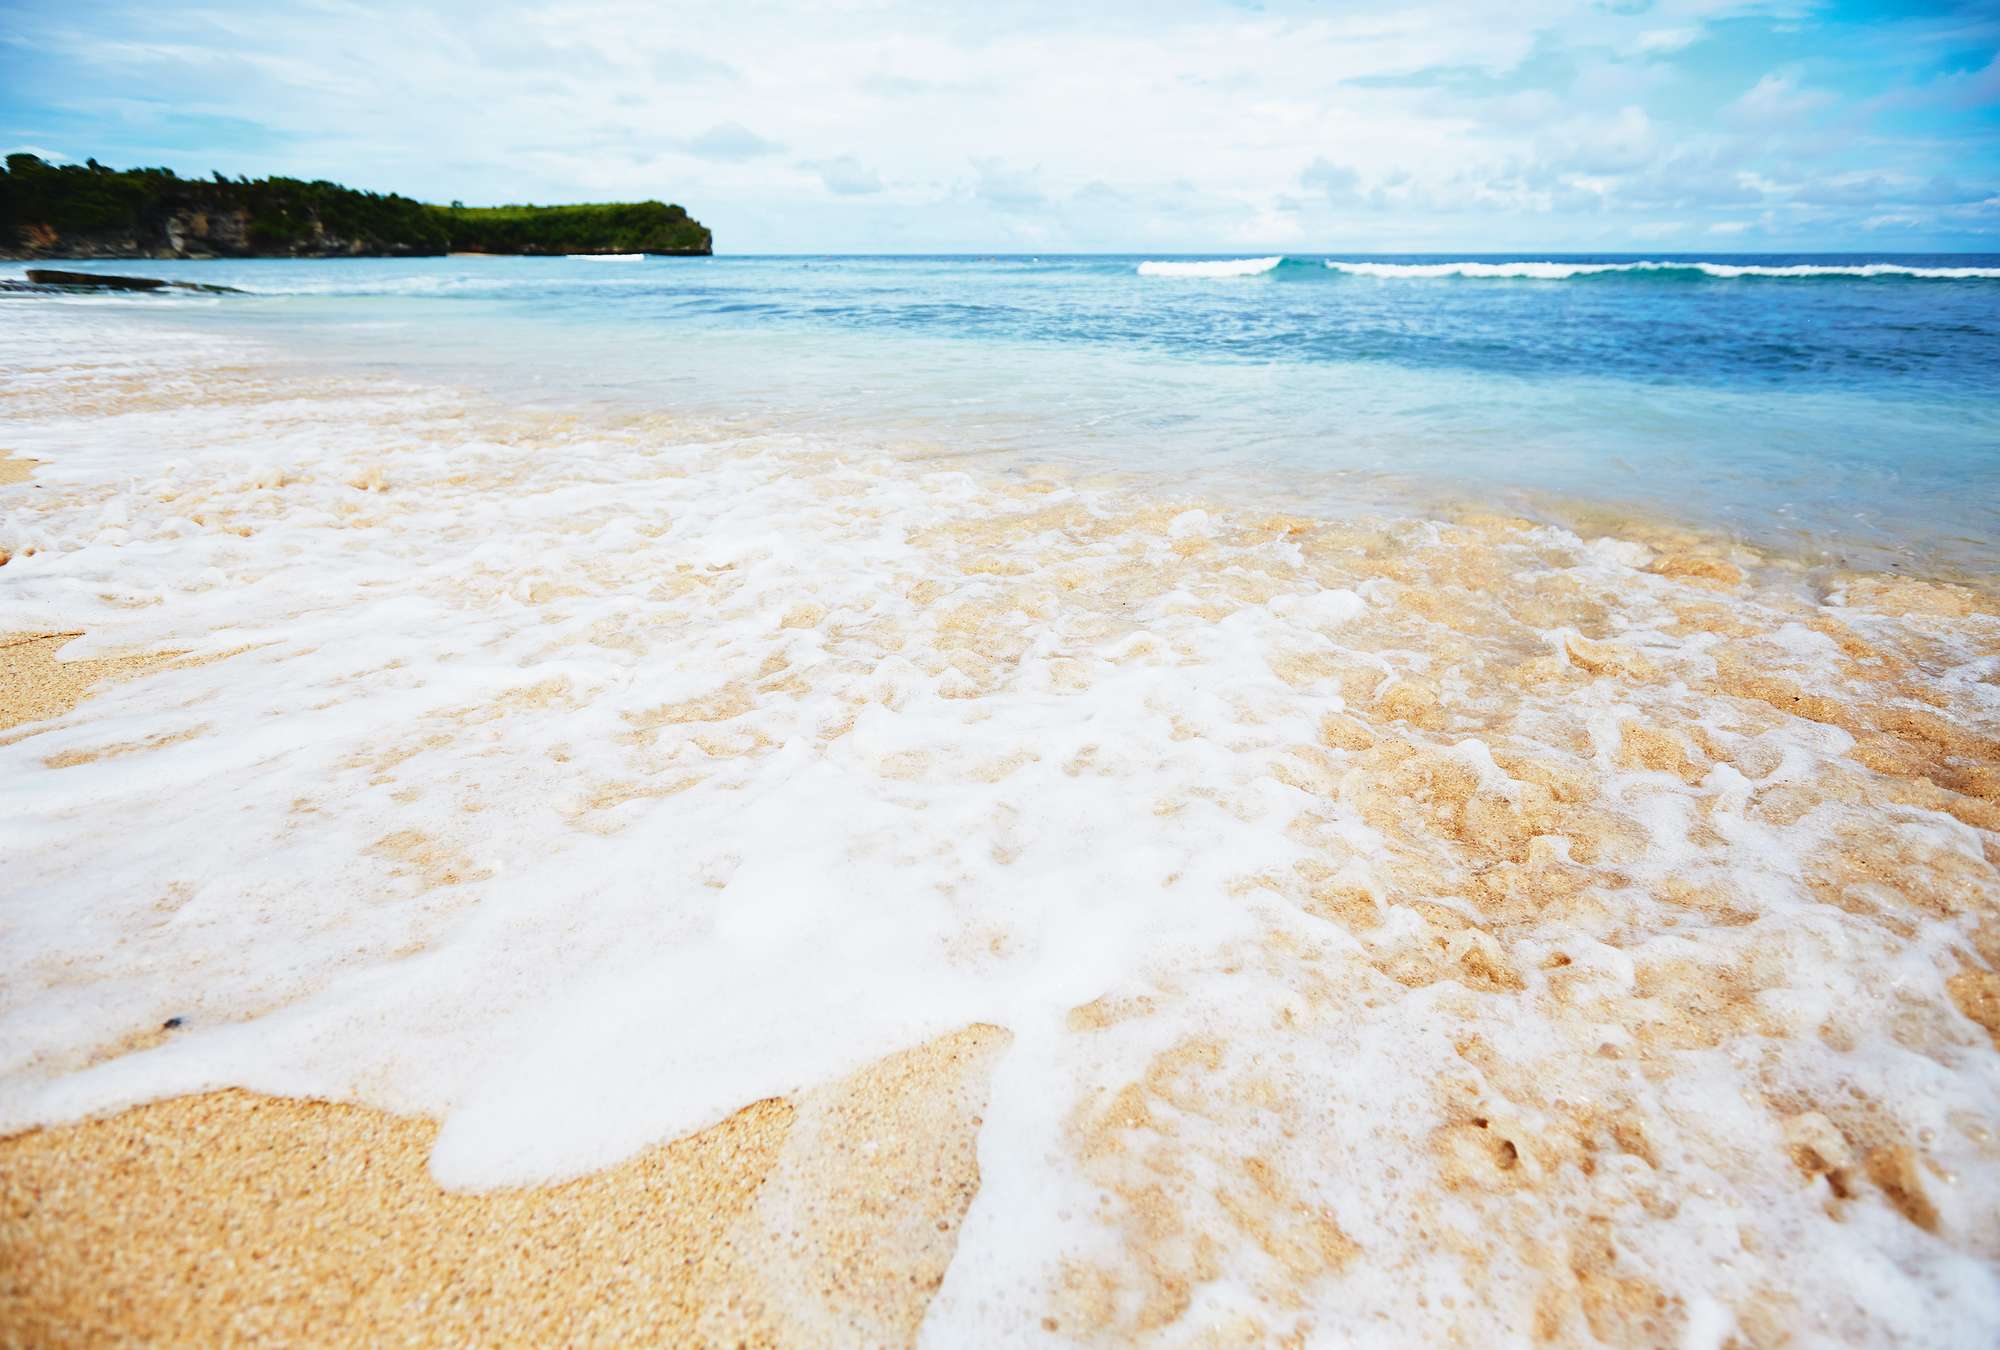             Photo wallpaper sandy beach in Bali with foaming waves
        